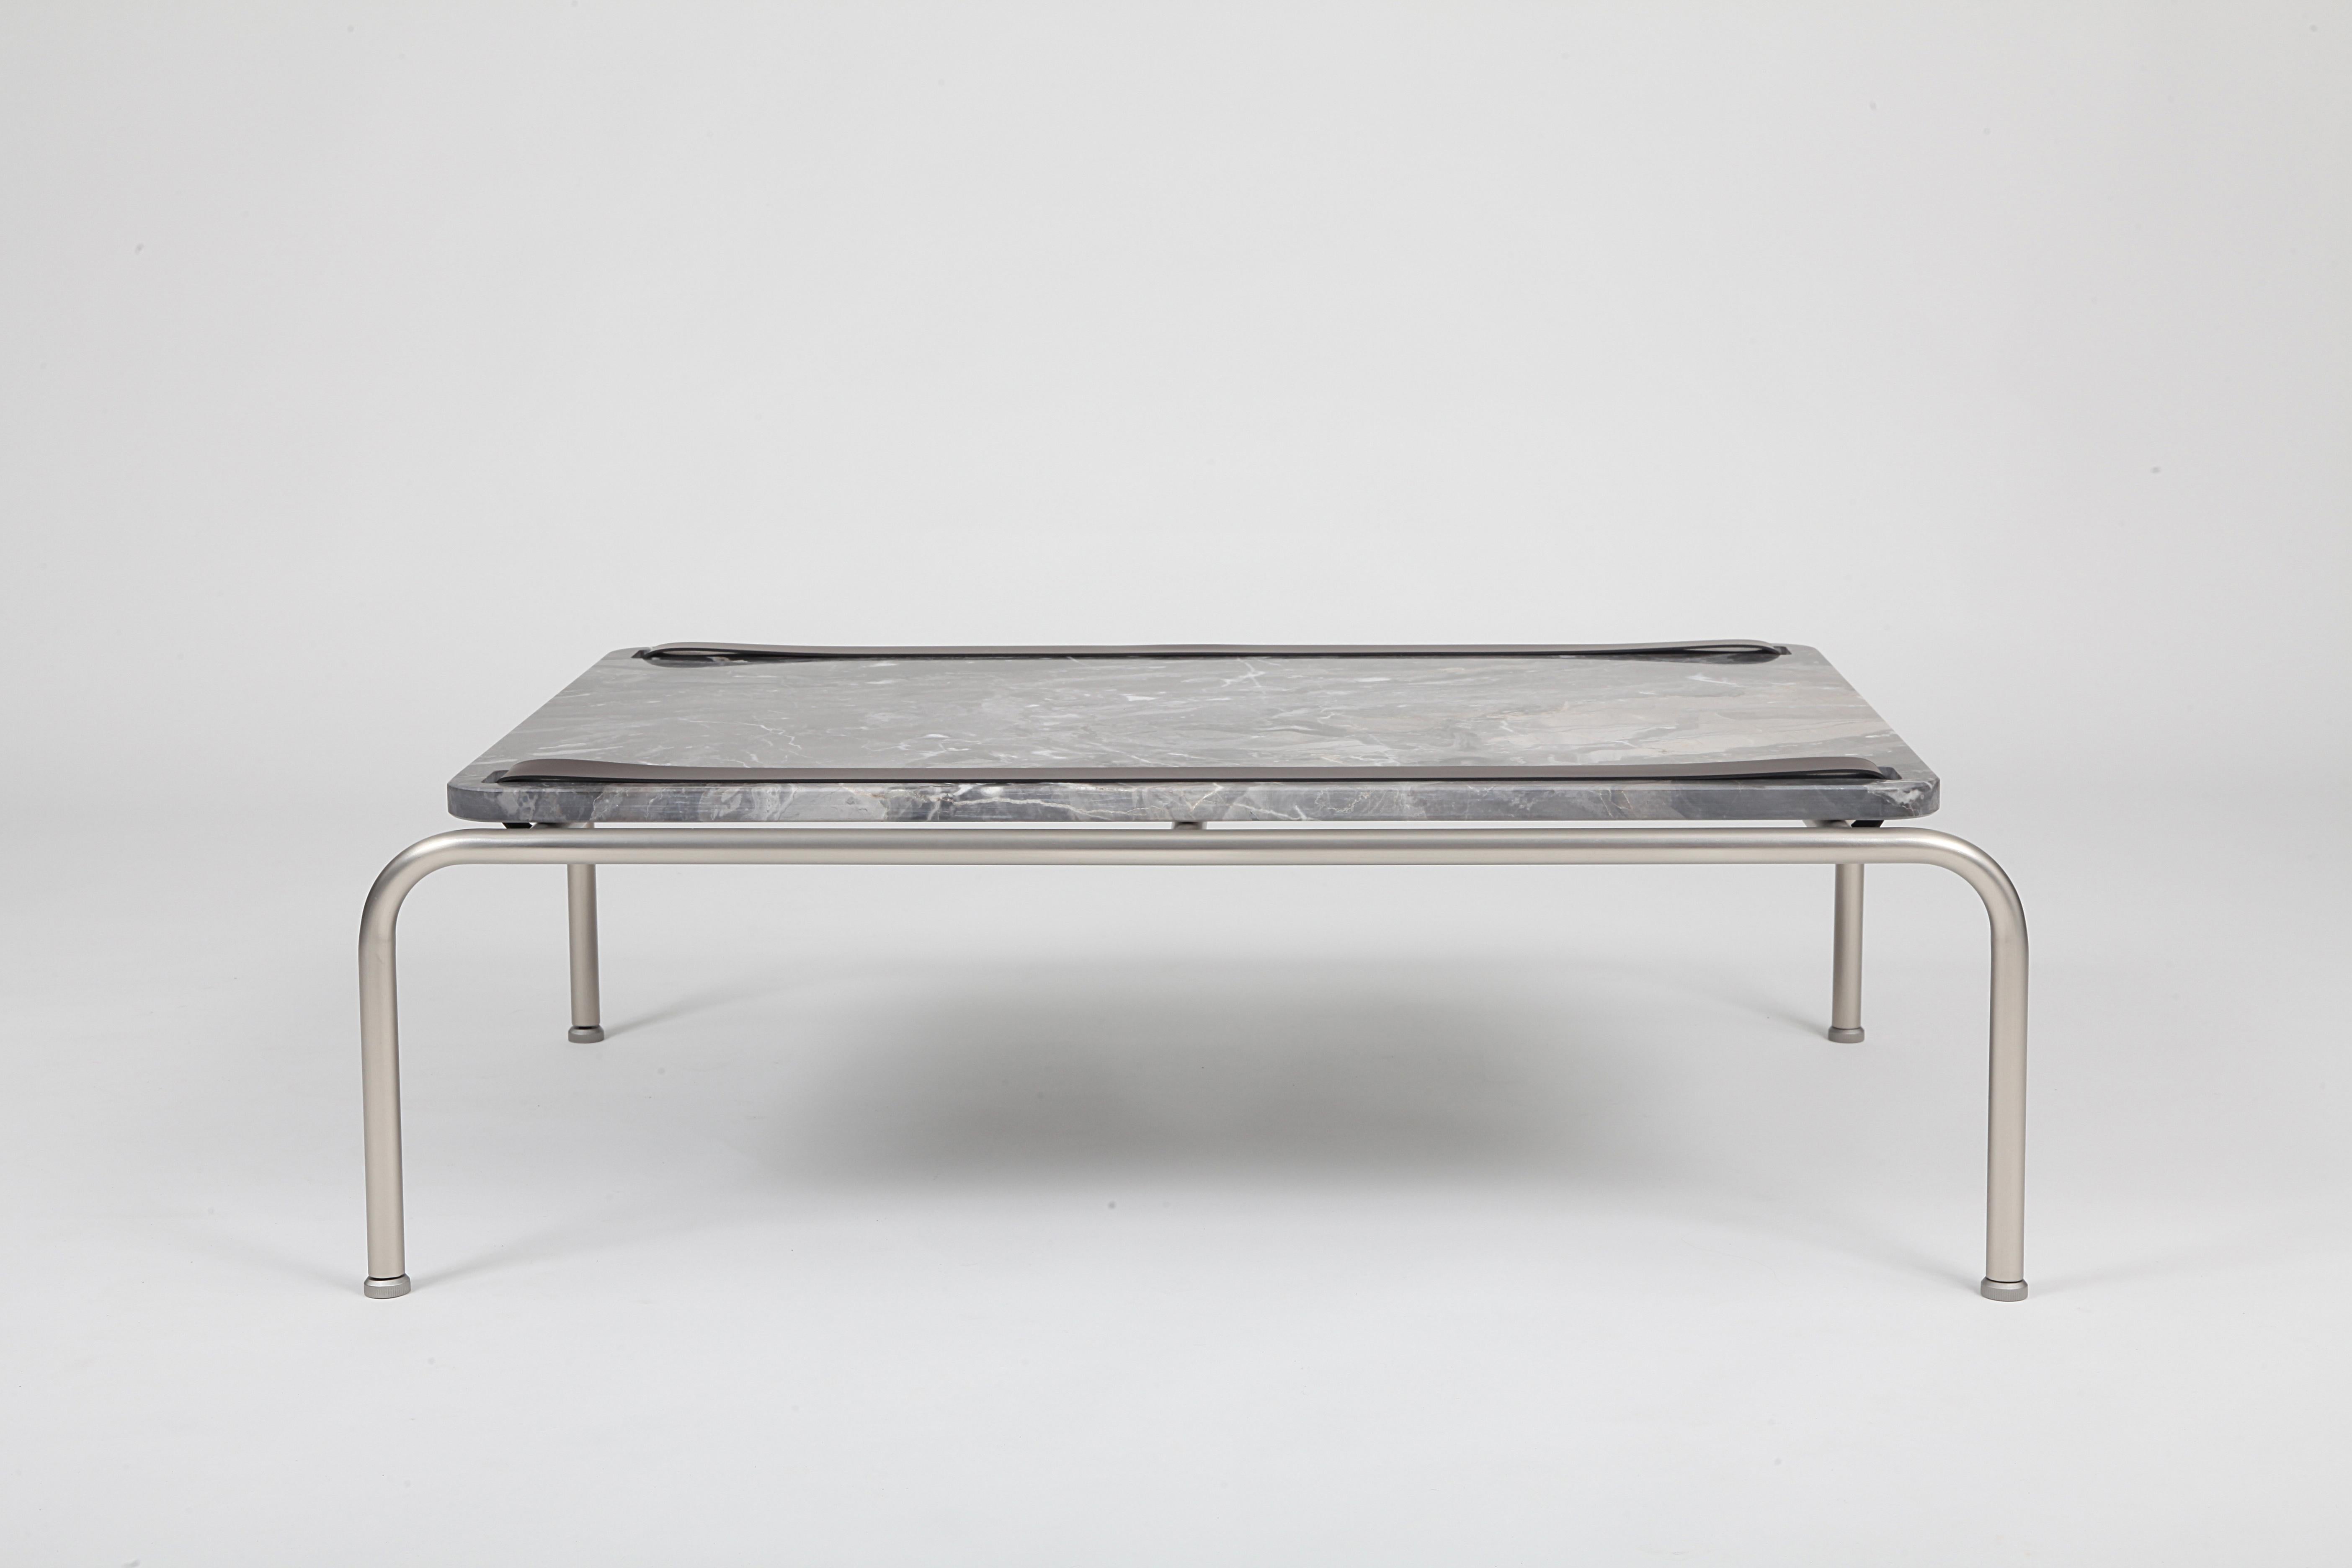 Marmorino Dover White Marble Coffee Table by Dalmoto
Dimensions: D 66 x W 92 x H 28 cm.
Materials: Nichel Marino nickel, Dover White marble and leather.

Available in different metal, marble and leather options. Available in two sizes. Please